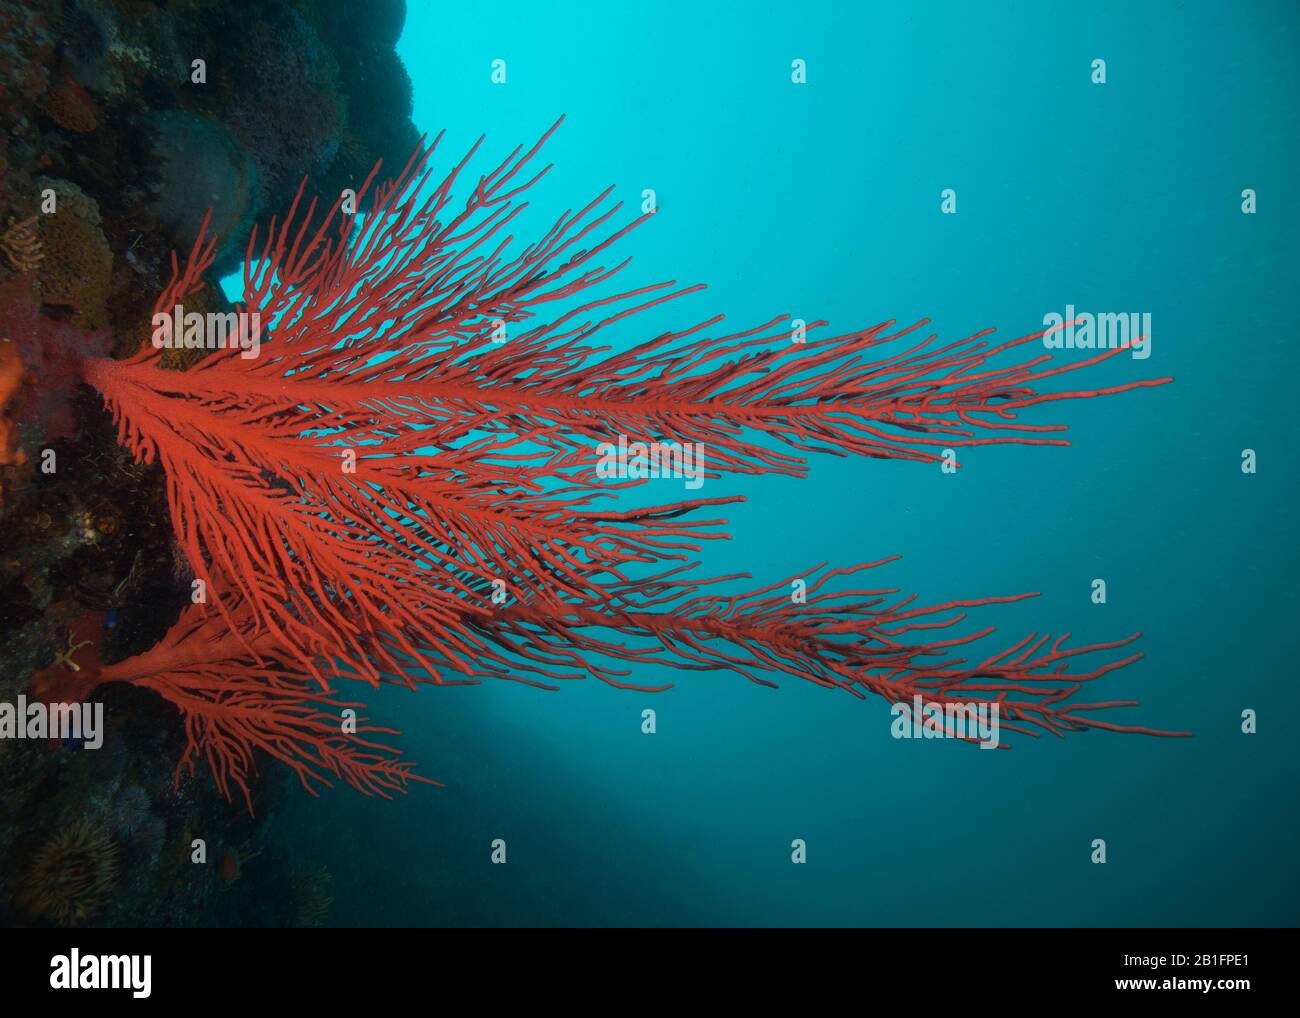 Large red Palmate sea fans (Leptogoria palma) growing out of the side of the reef. Stock Photo